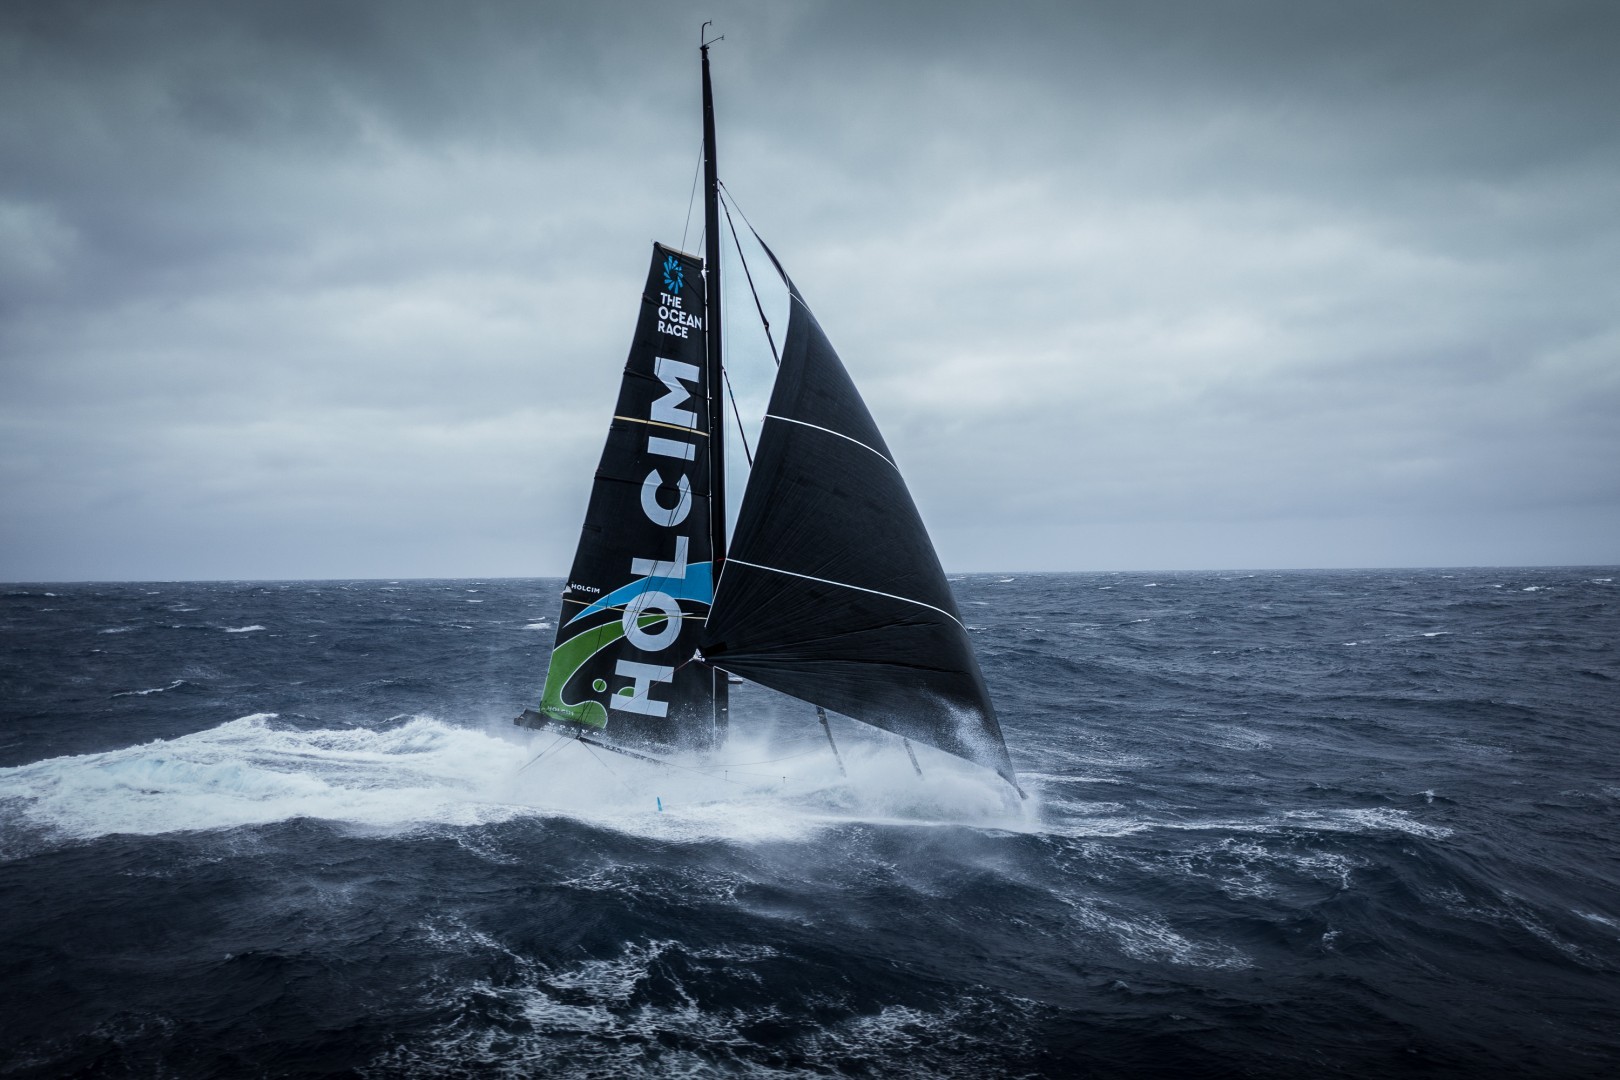 Leg 3 Day 27 onboard Team Holcim - PRB. Drone view in the Southern Ocean.
© Julien Champolion / The Ocean Race